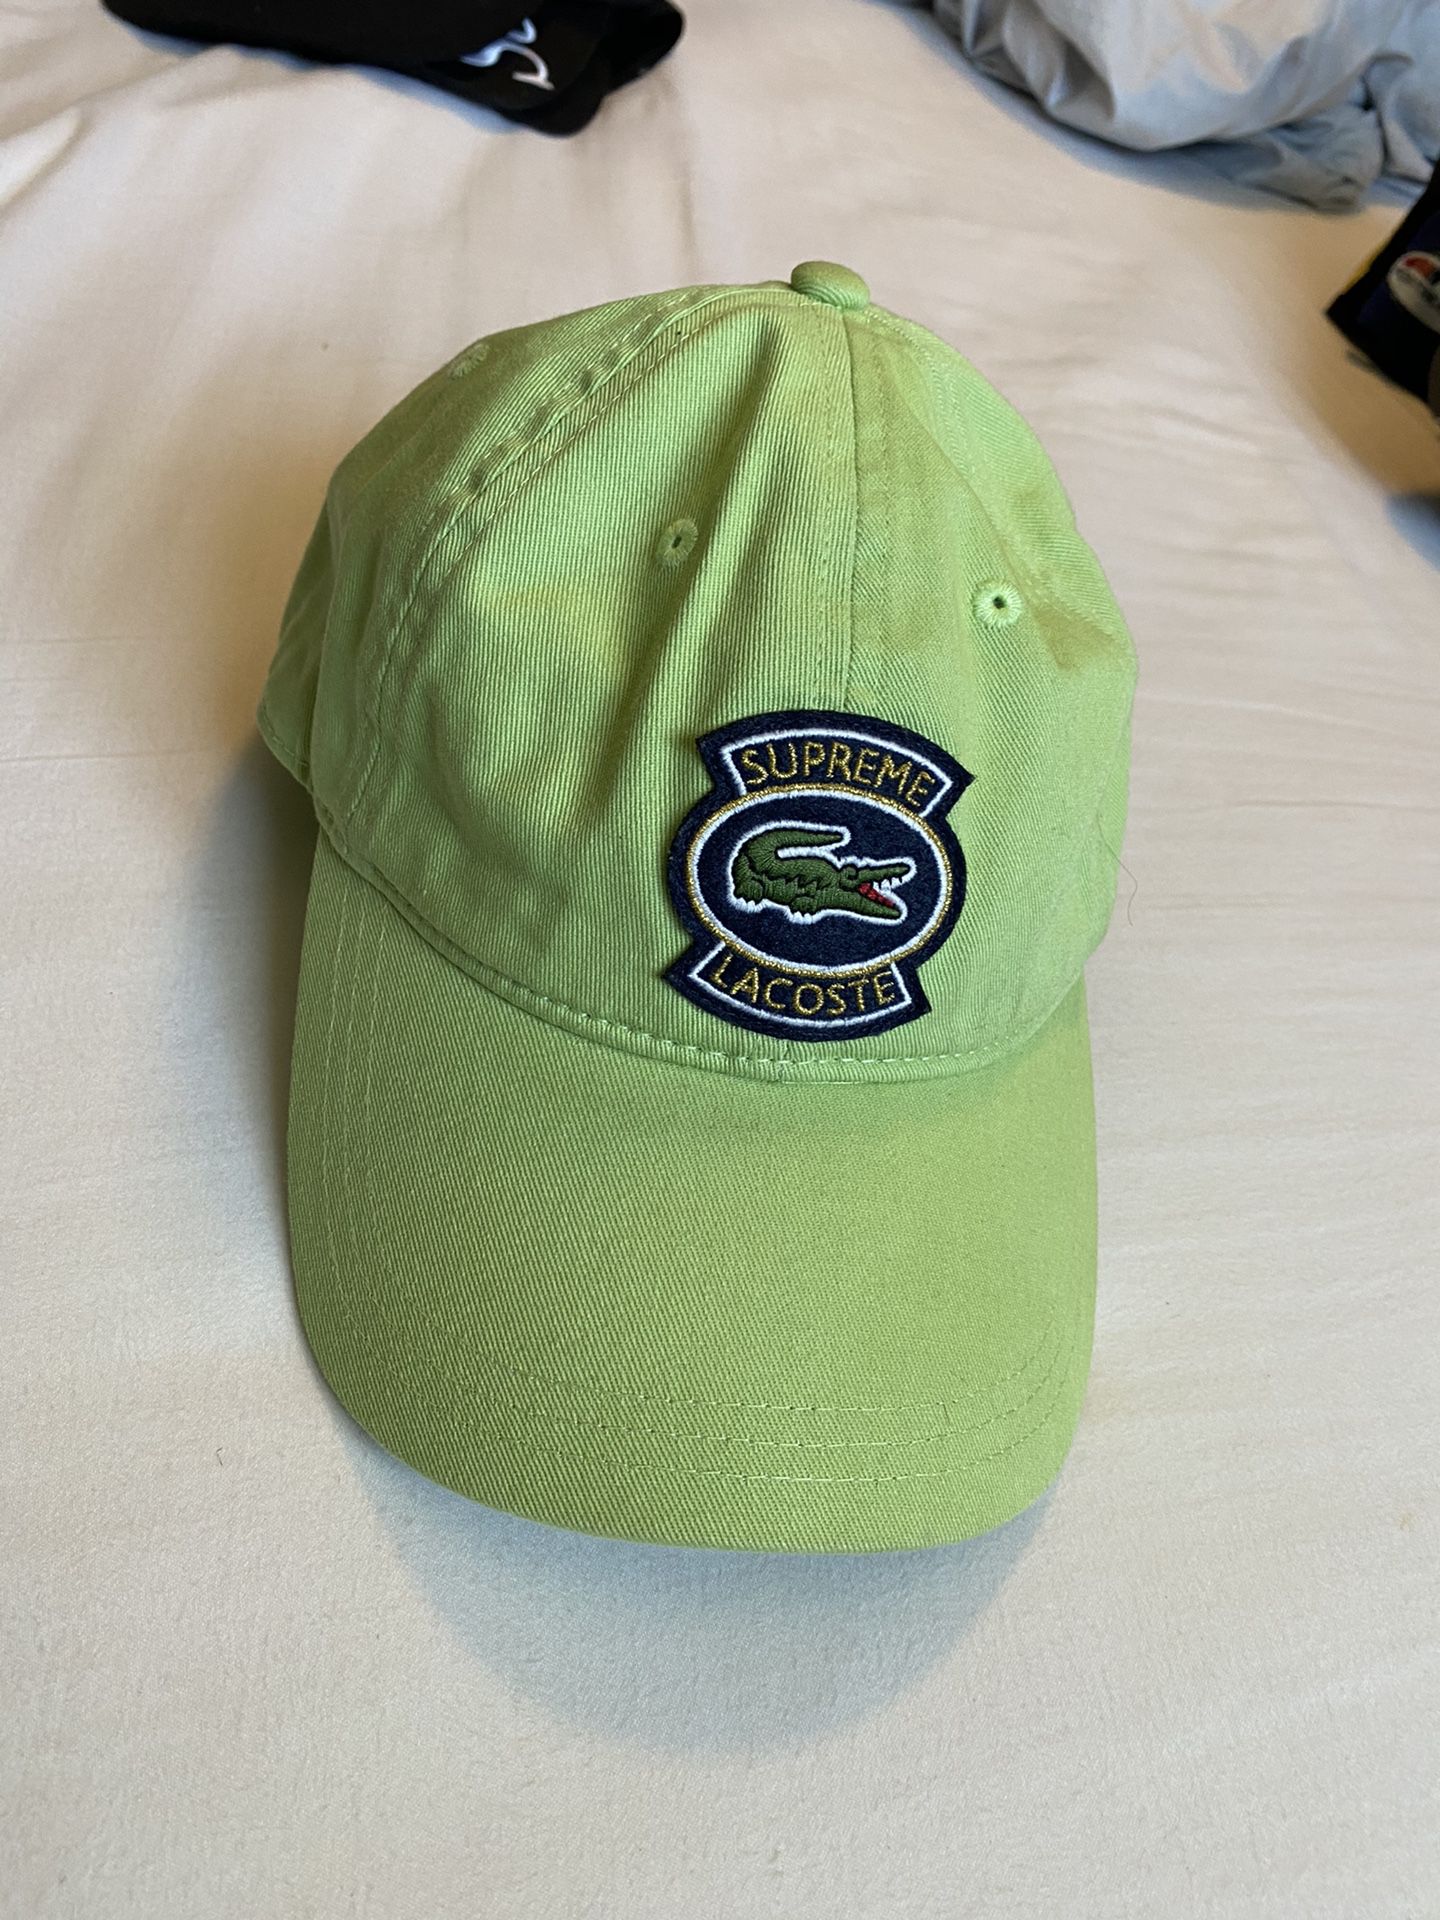 lactose green hat for Sale in Los Angeles, CA - OfferUp